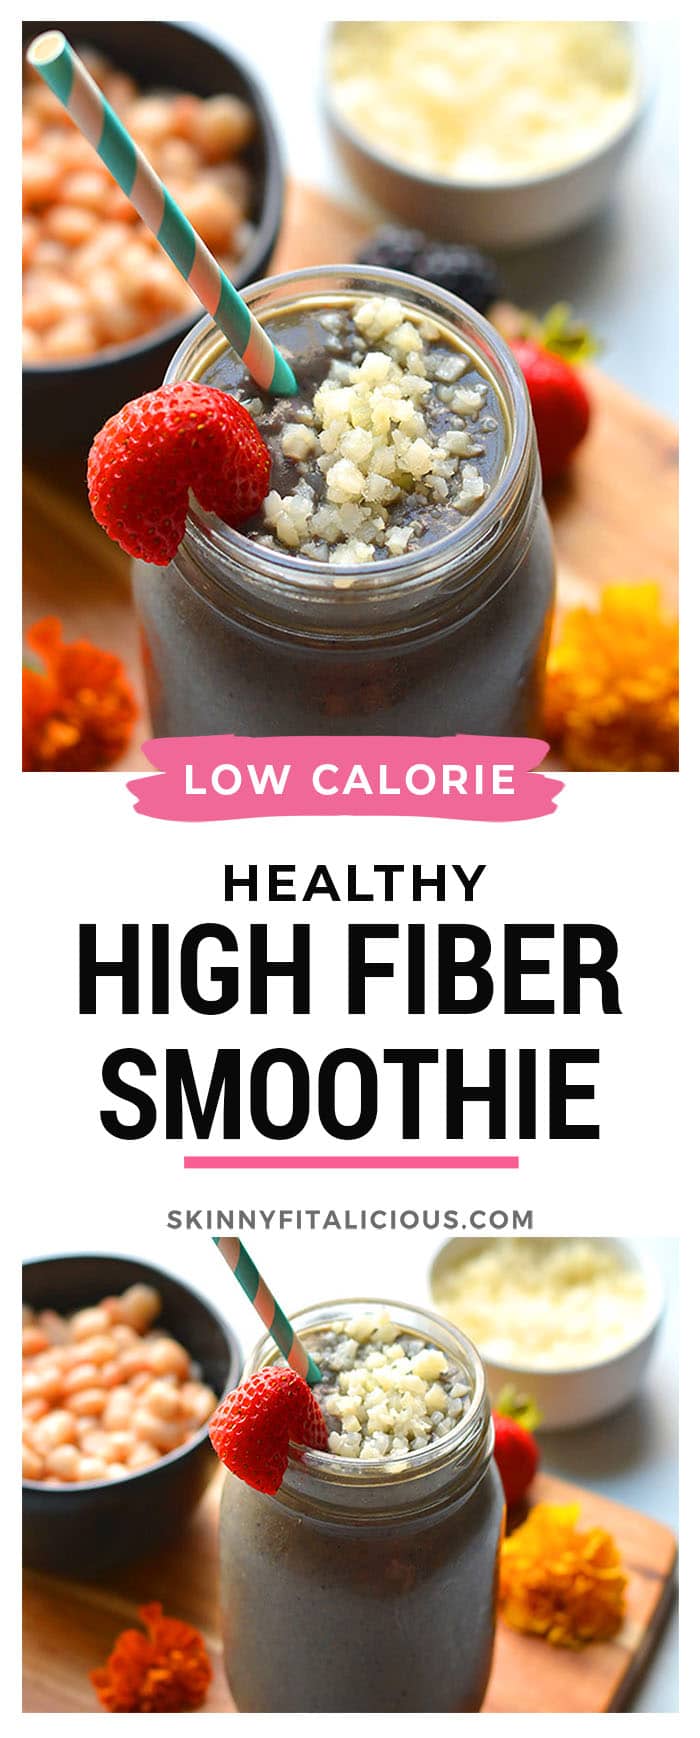 High Fiber Protein Smoothie! This weight loss smoothie recipe has the right balance of ingredient for fat loss. Great for breakfast or a meal replacement! Low Calorie + Gluten Free + Paleo + Vegan